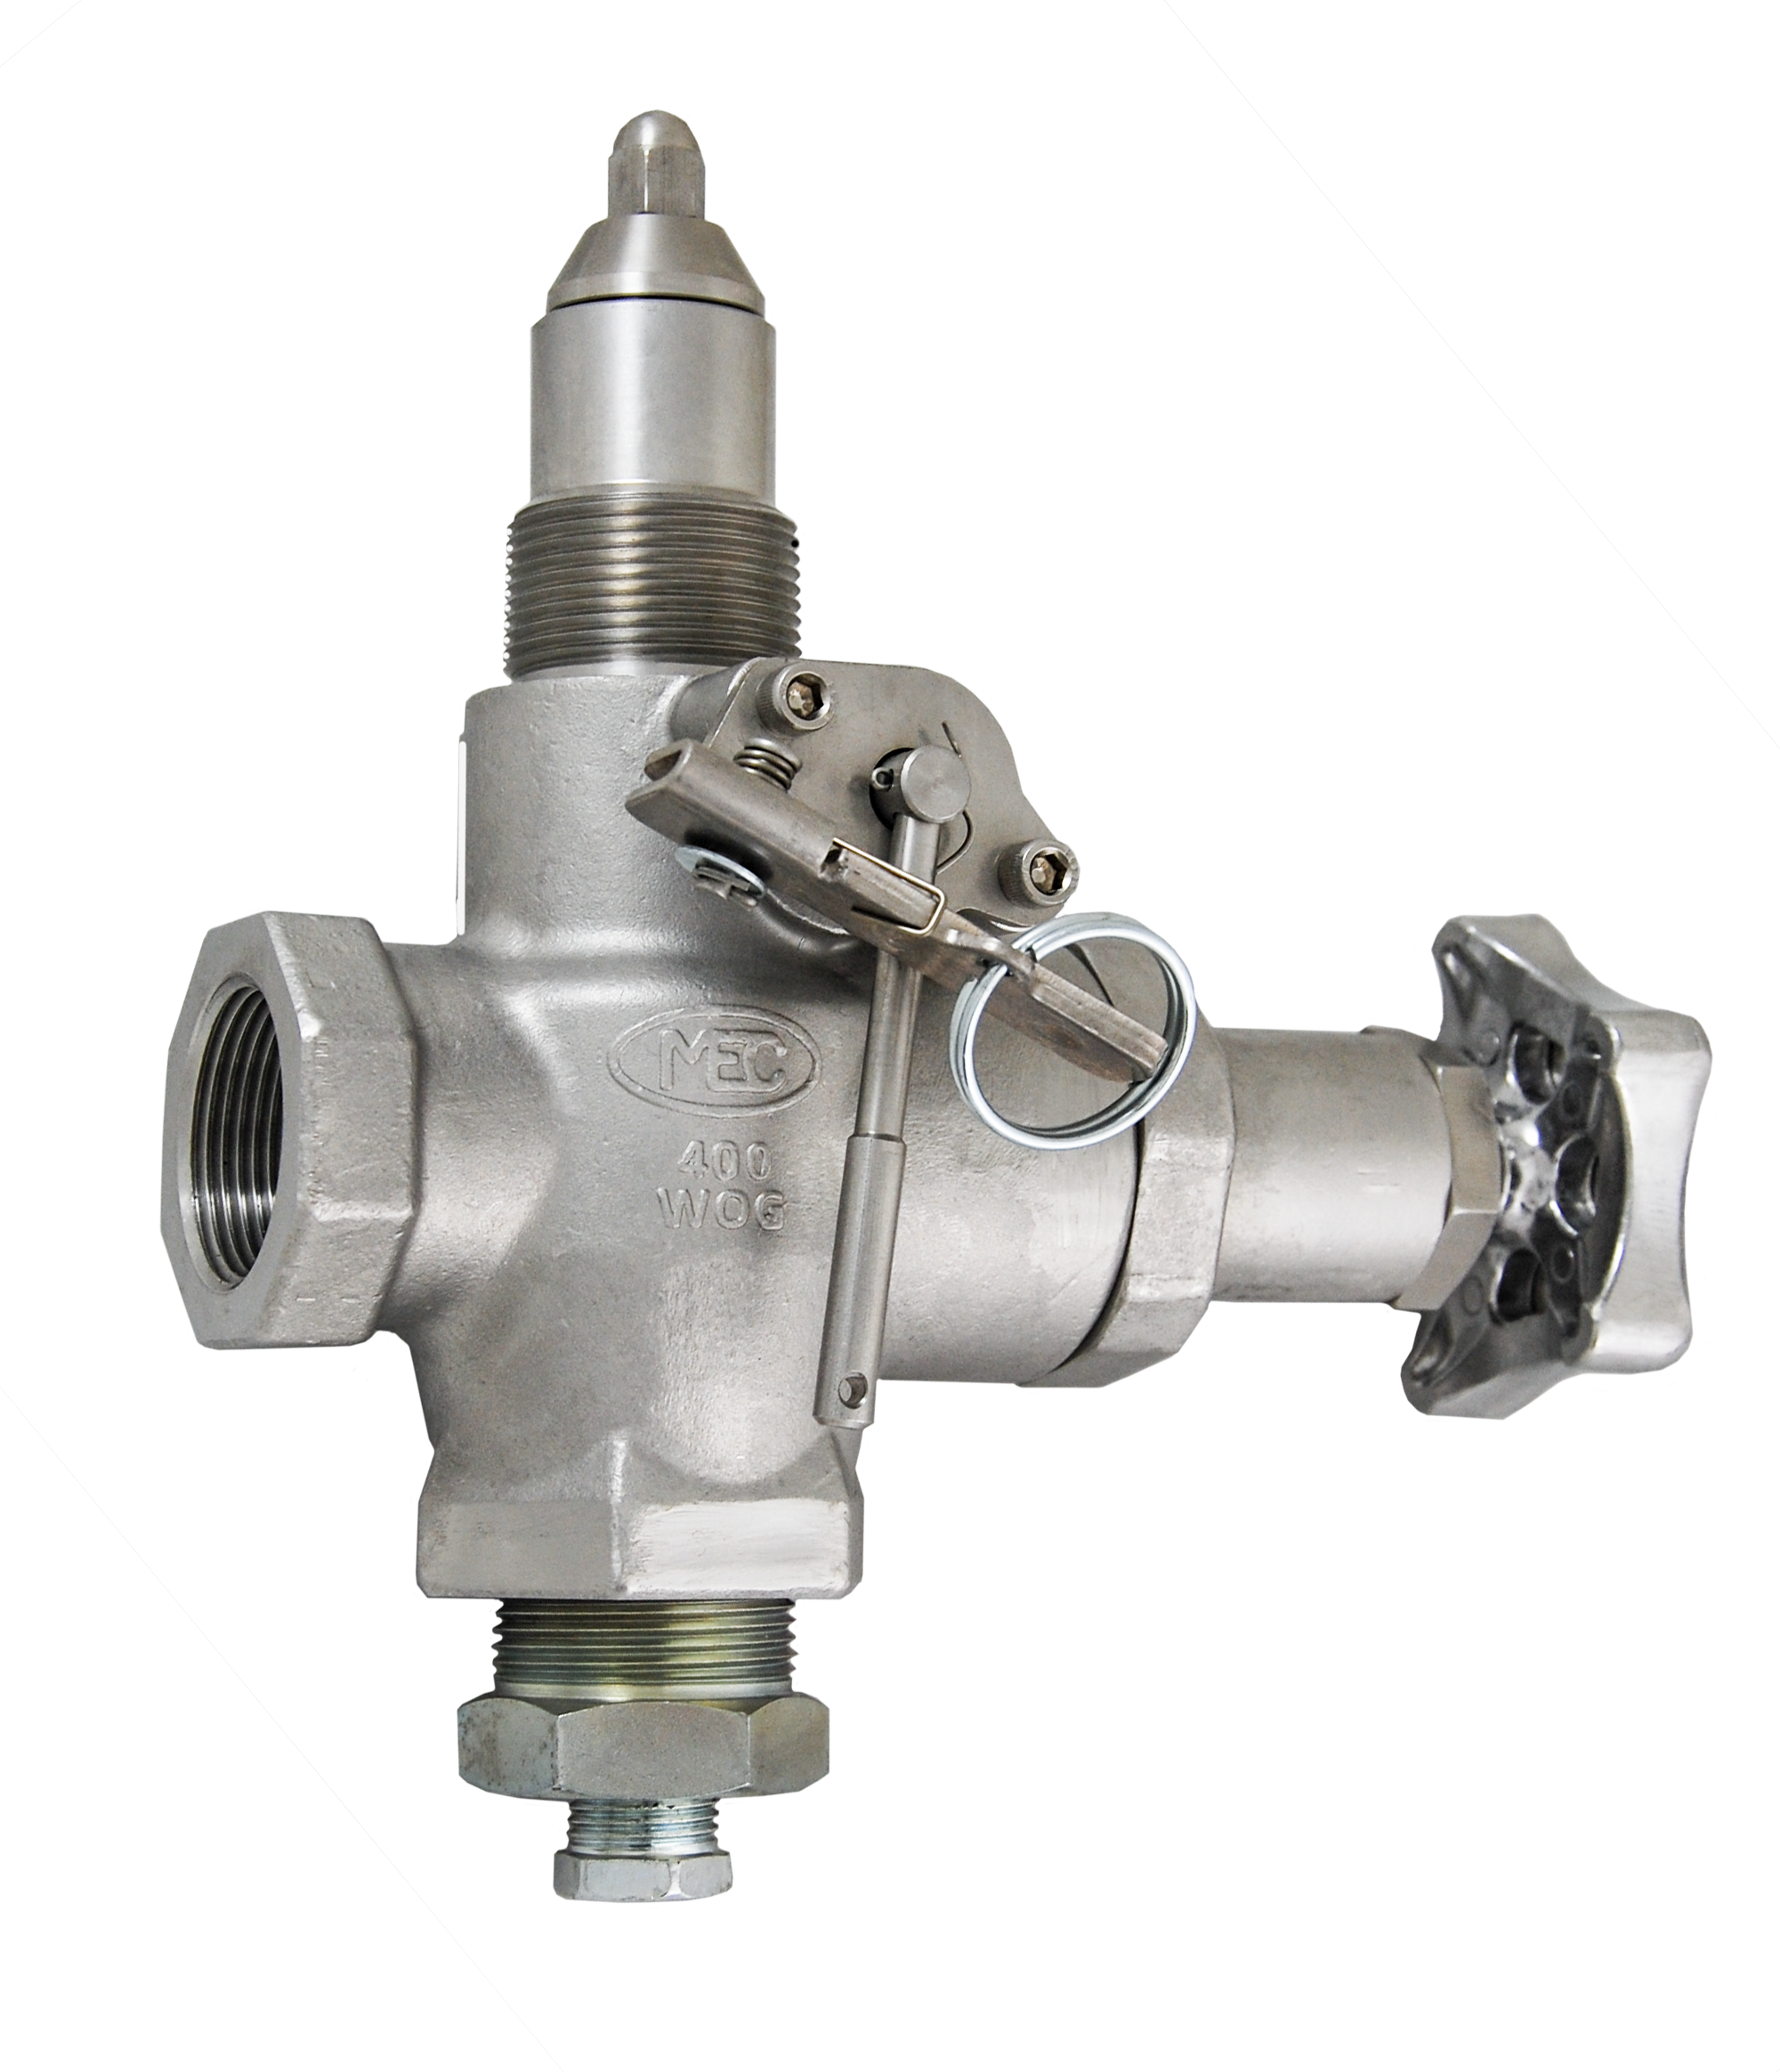 Marshall Excelsior introduces new internal propane valve to increase safety of propane systems reports BPN 04-2020